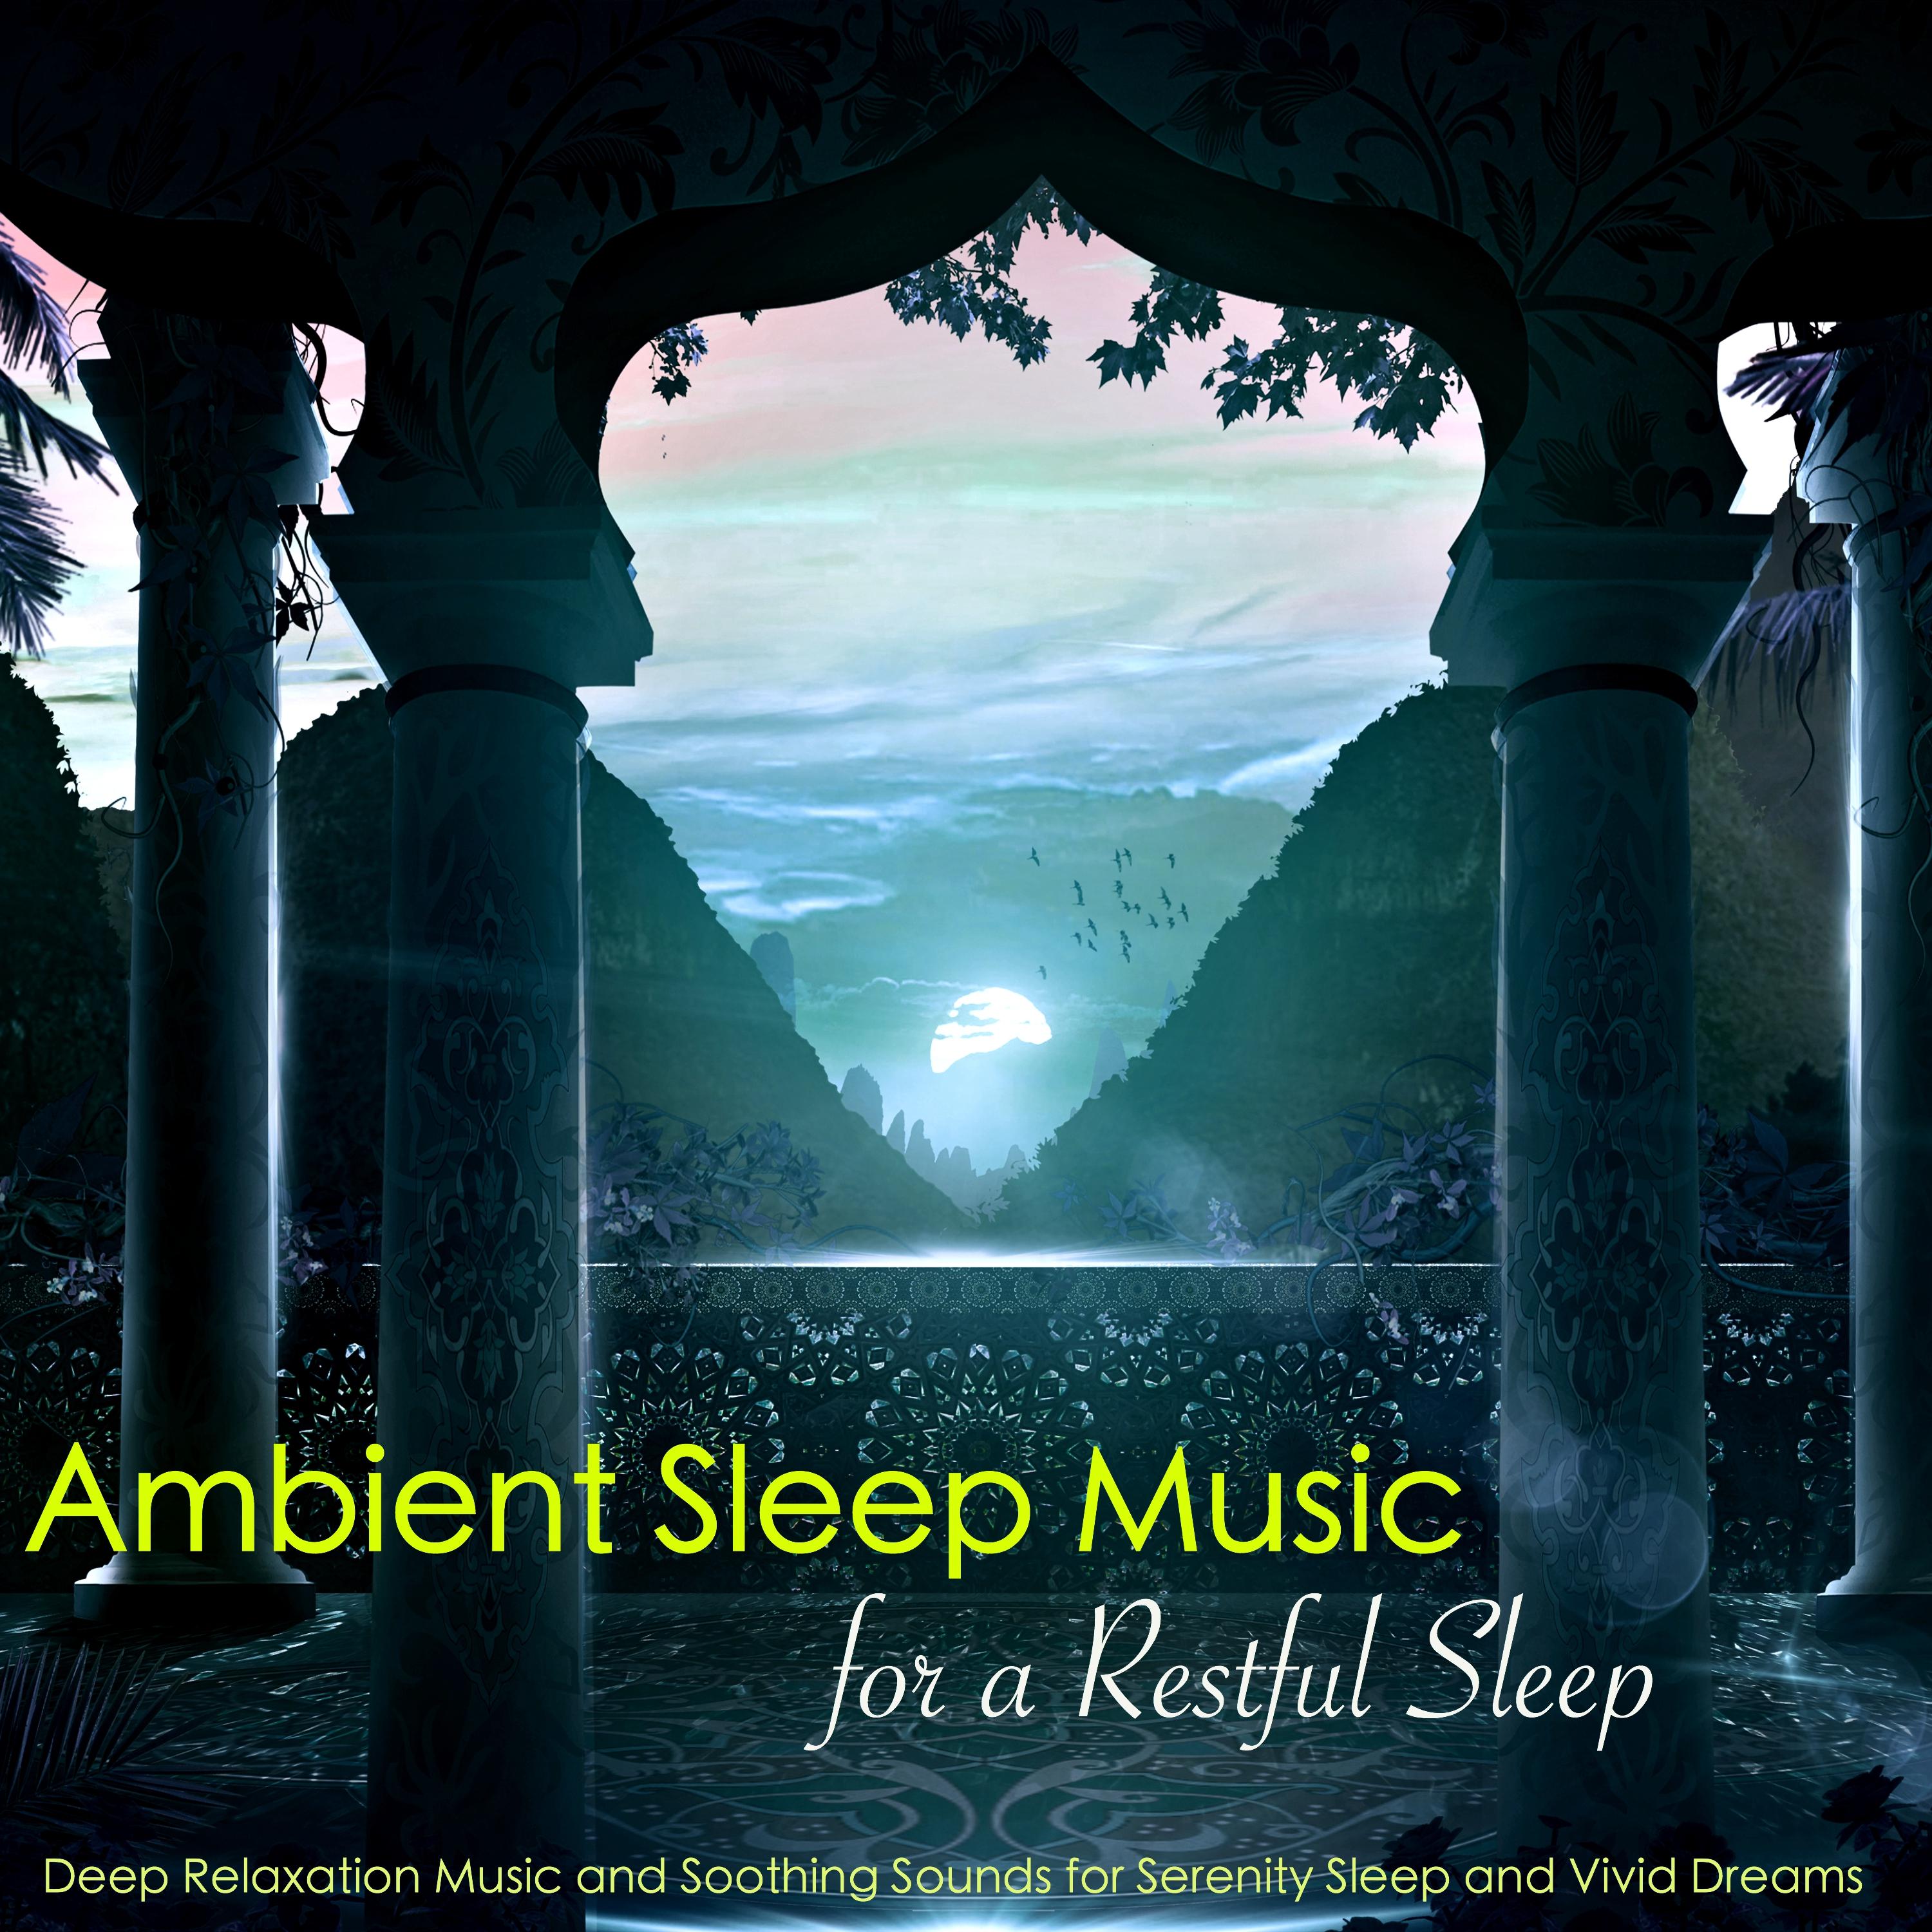 Ambient Sleep Music for a Restful Sleep  Deep Relaxation Music and Soothing Sounds for Serenity Sleep and Vivid Dreams